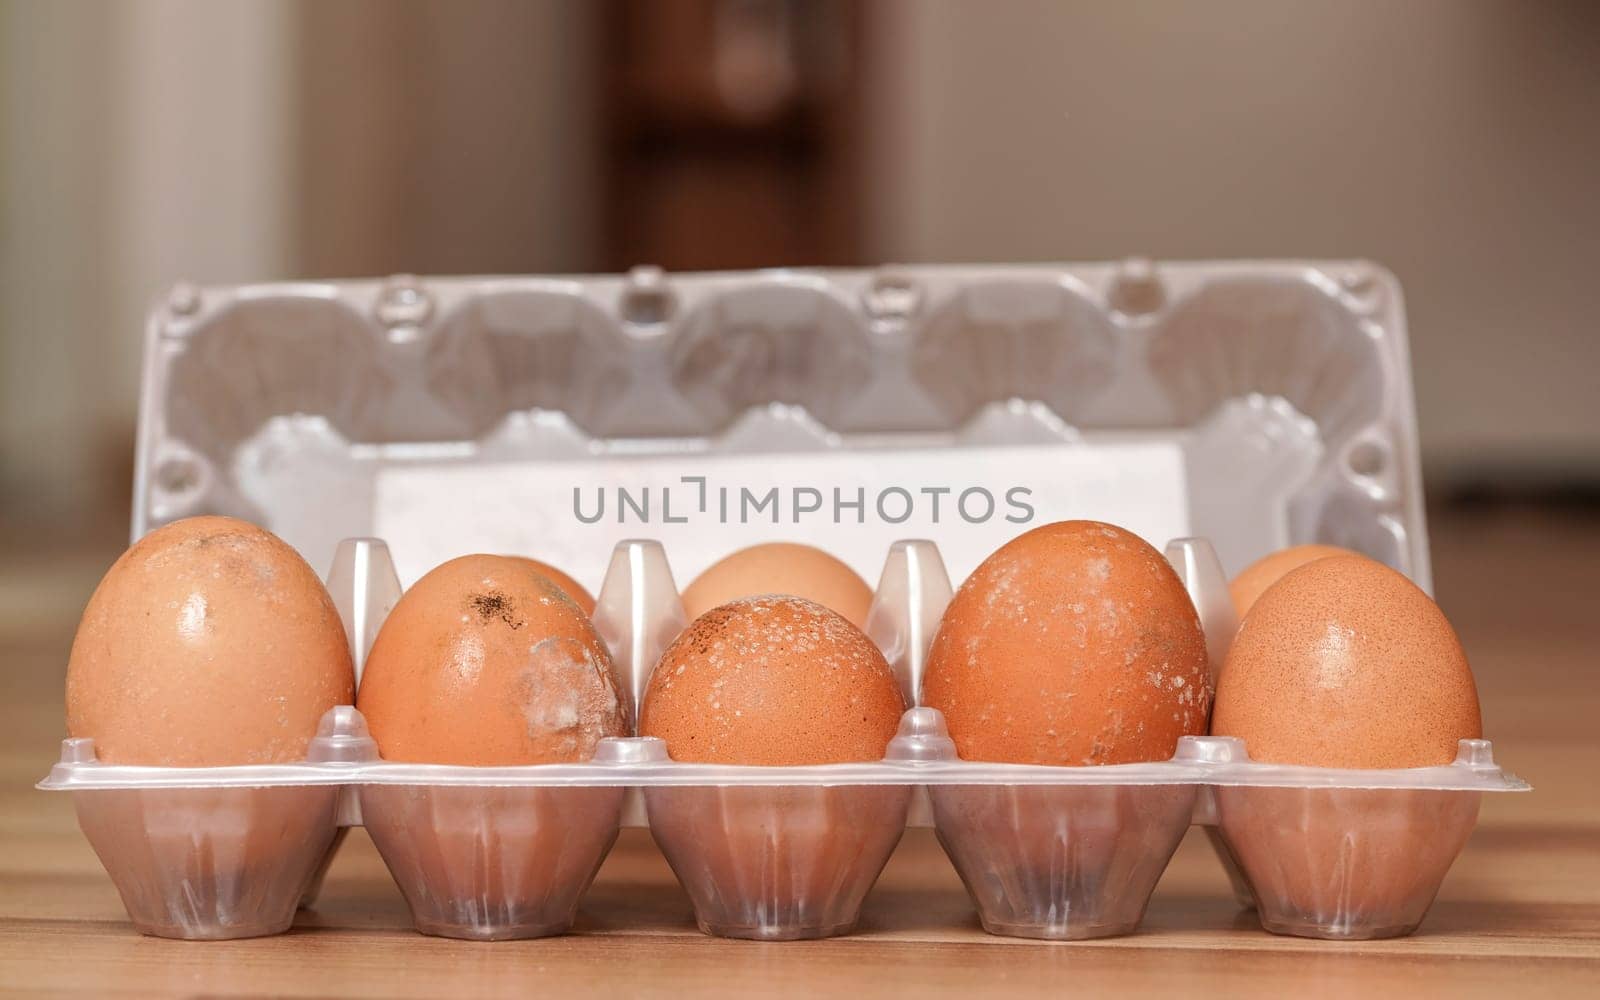 Ten mouldy eggs in plastic packaging, mildew growing on shell as they were stored improperly in wet fridge for long by Ivanko